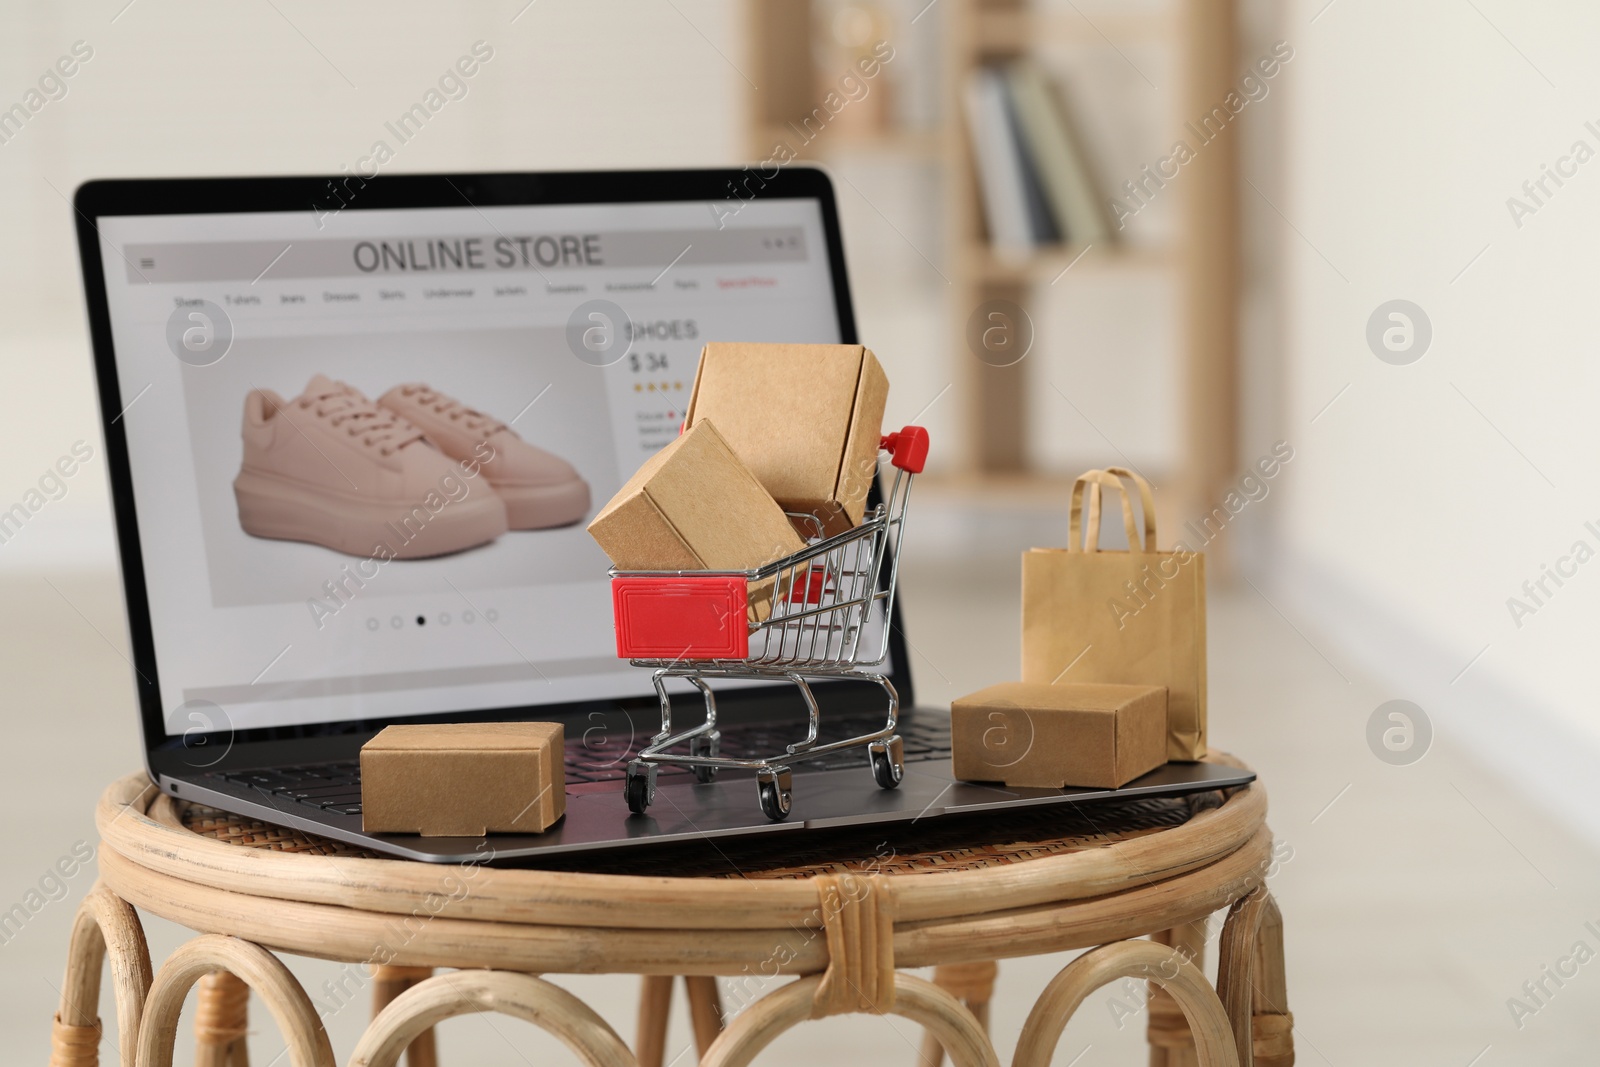 Photo of Online store. Laptop, mini shopping cart and purchases on table